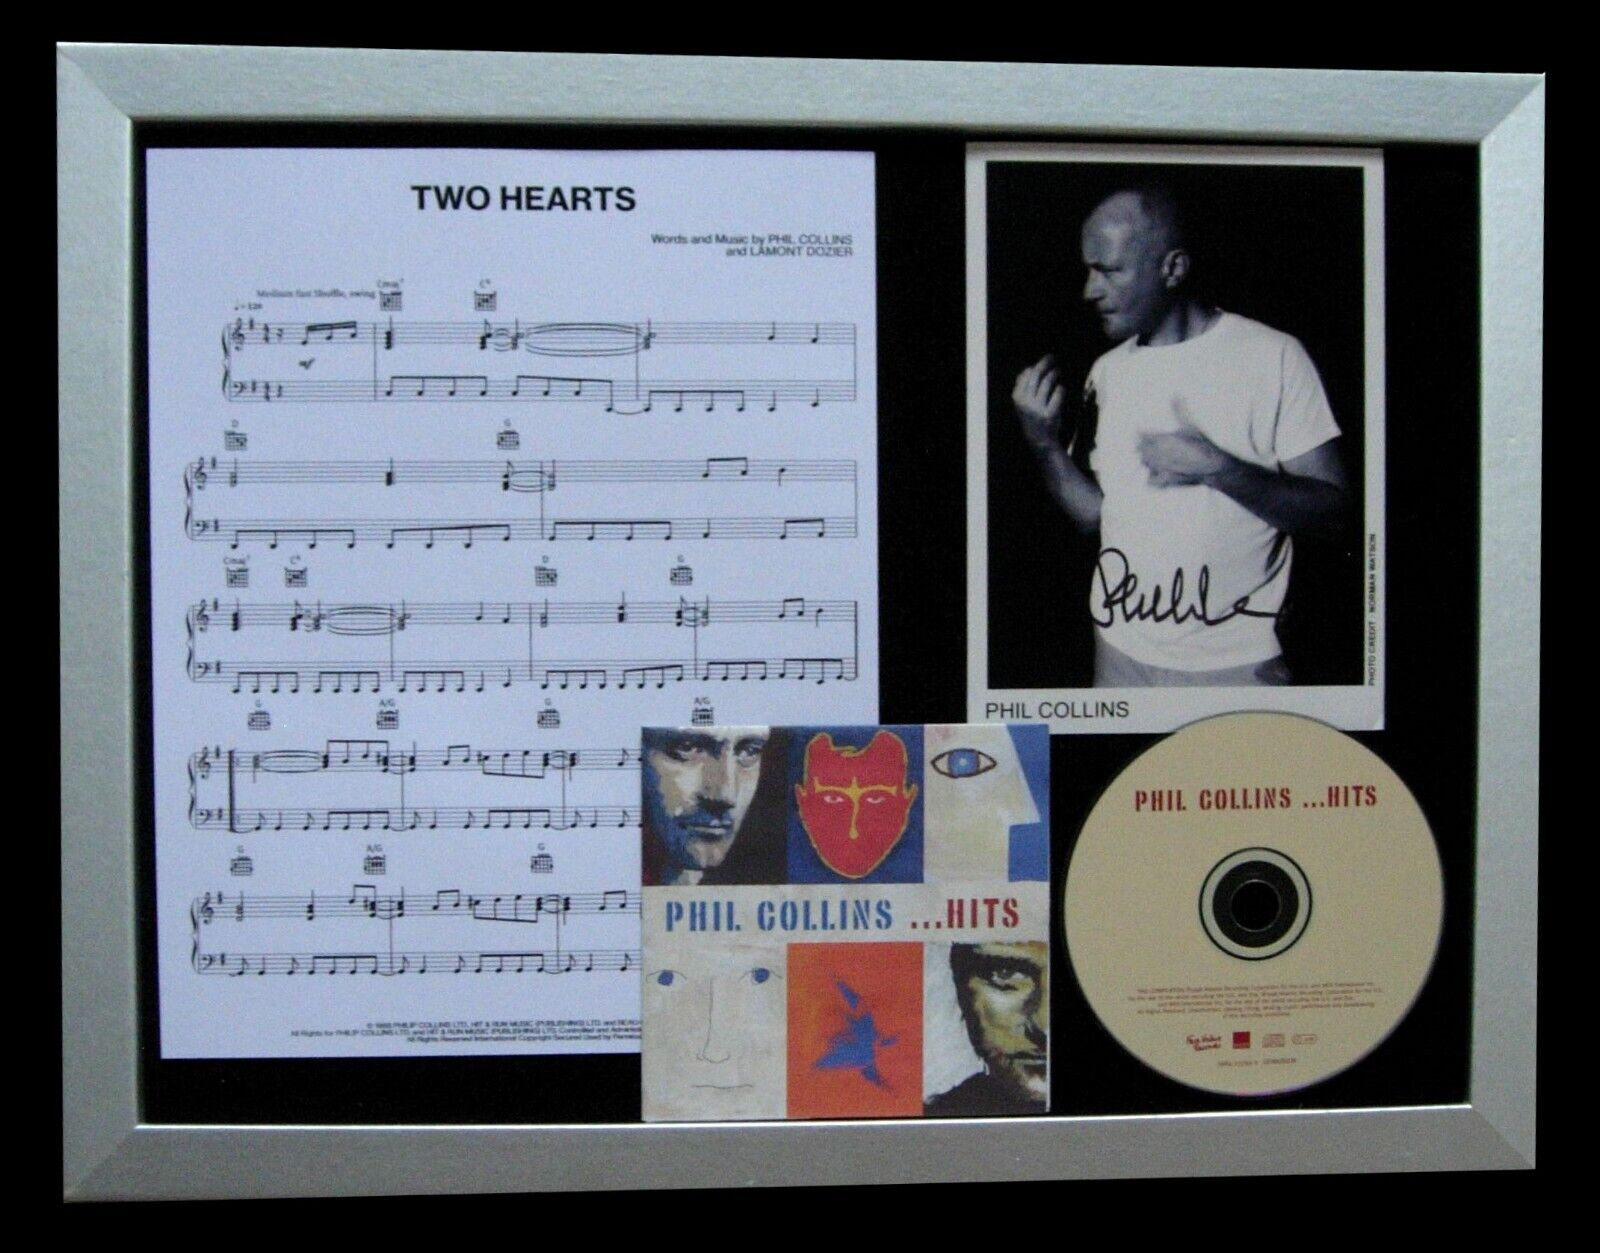 PHIL COLLINS+SIGNED+QUALITY FRAMED+TWO HEARTS=100% AUTHENTIC+EXPRESS WORLD SHIP